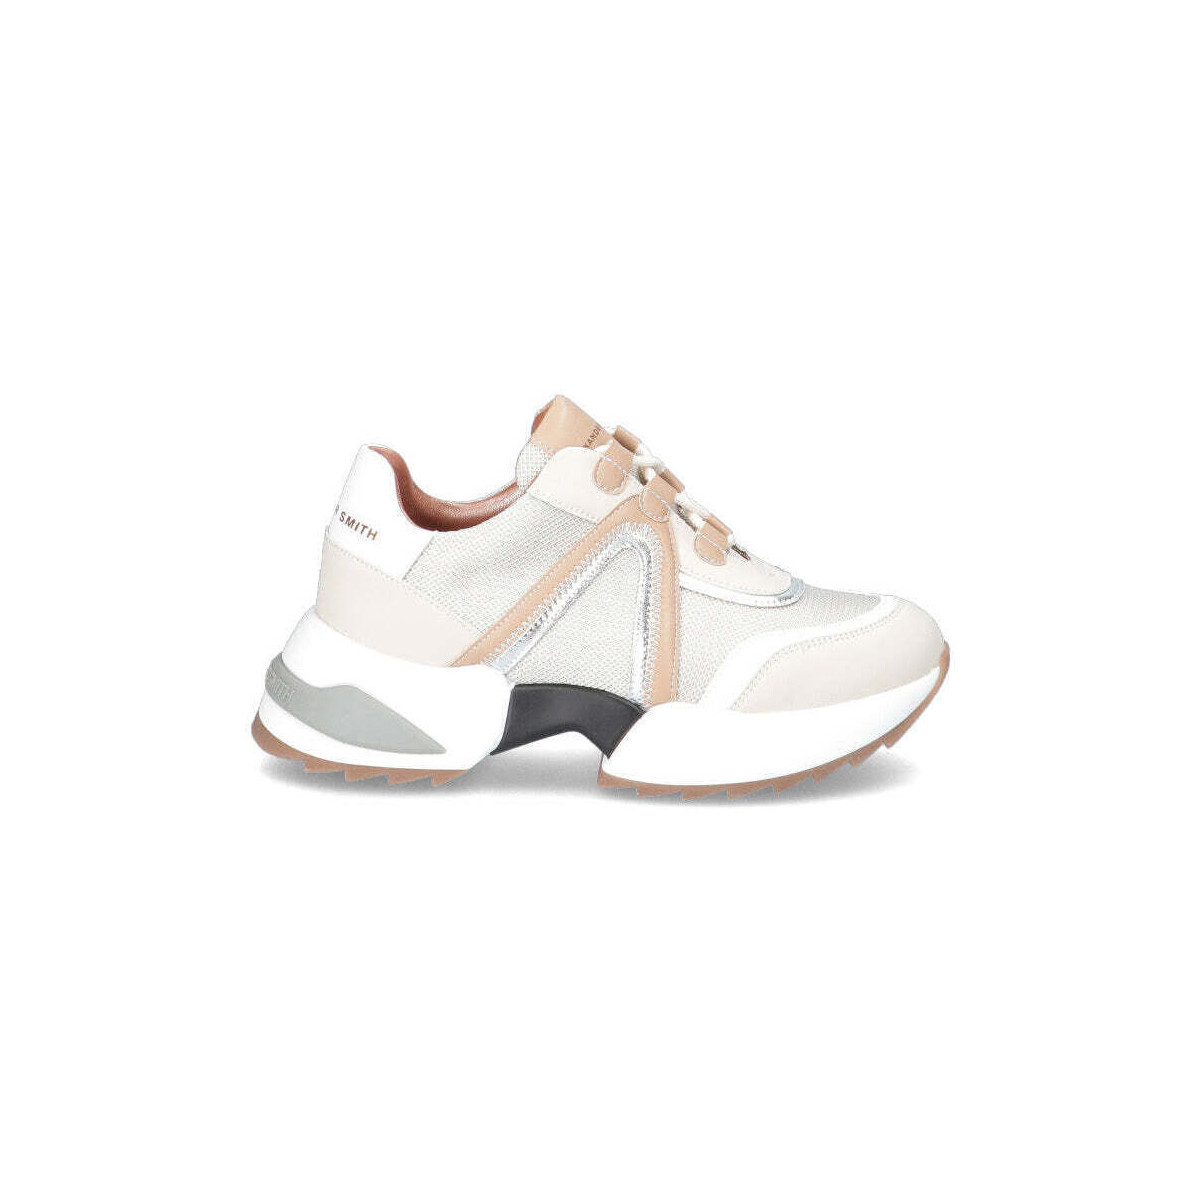 Chaussures Femme badgley mischka designers titan partnership new launches shoes Sneaker  Donna 